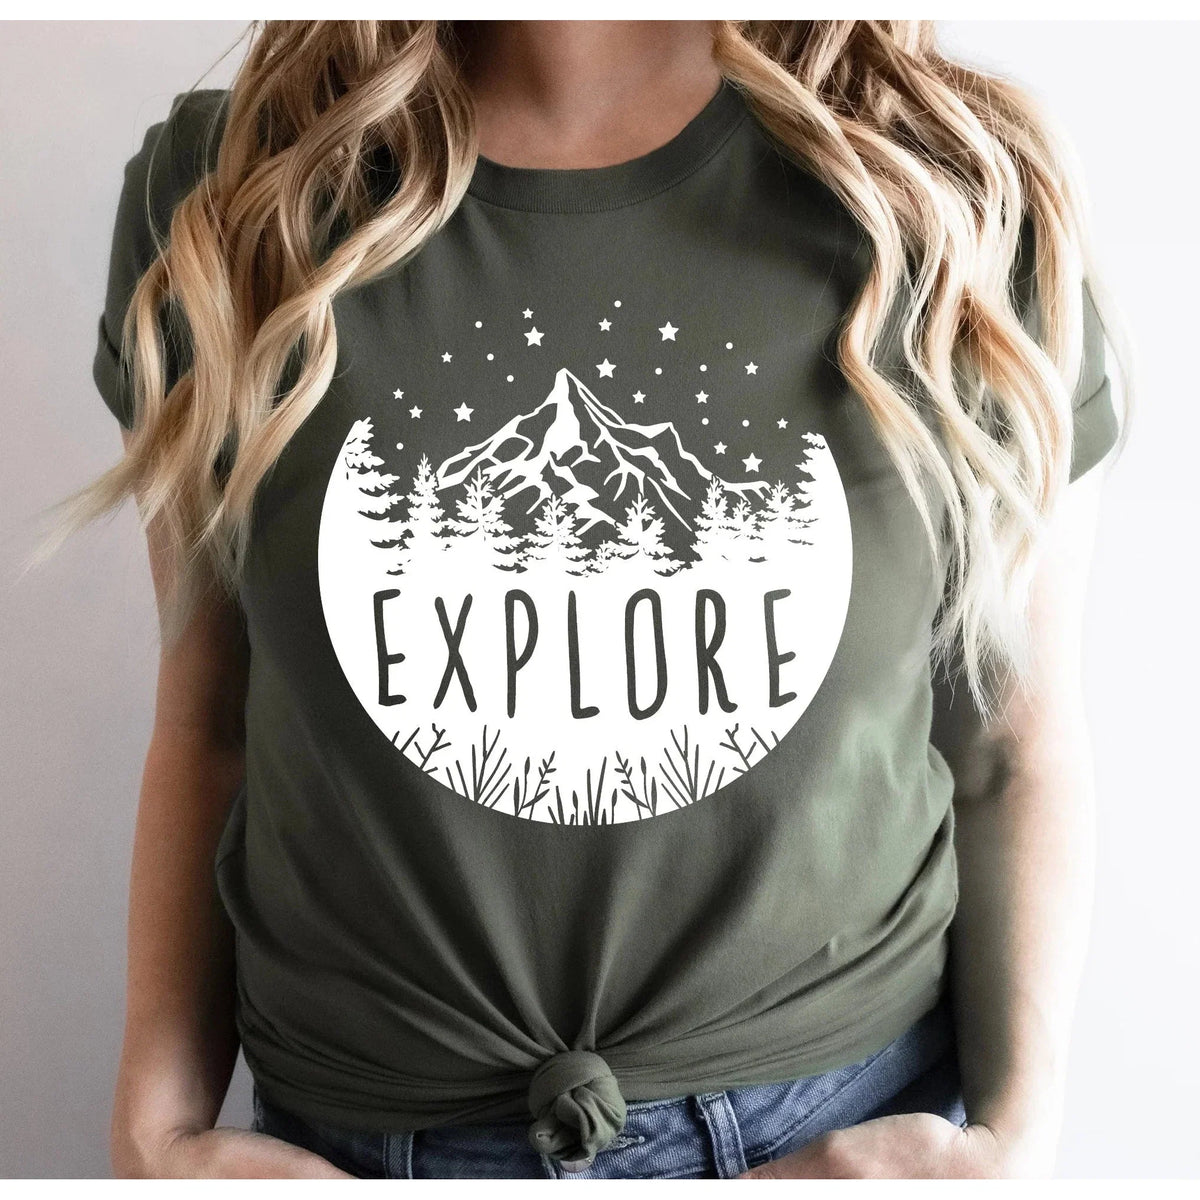 Explore GRAPHIC TEE ALLOW 7 DAYS TO SHIP + SHIP TIME